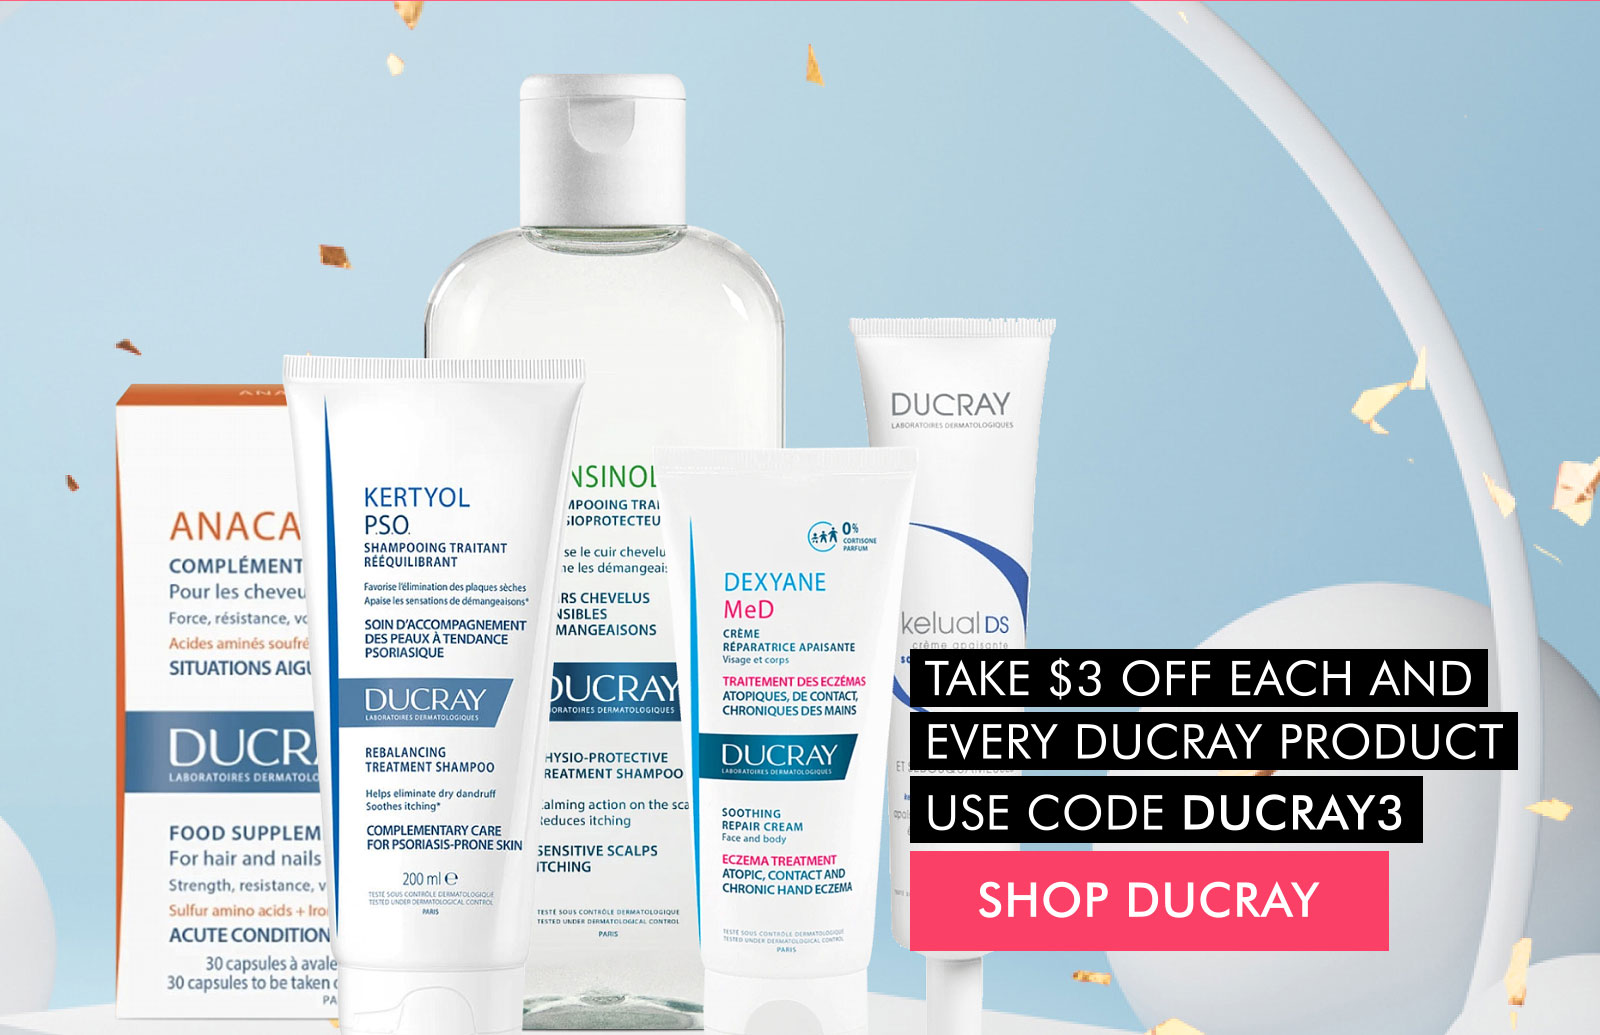 Instant $3 rebate on all Ducray products with code DUCRAY3